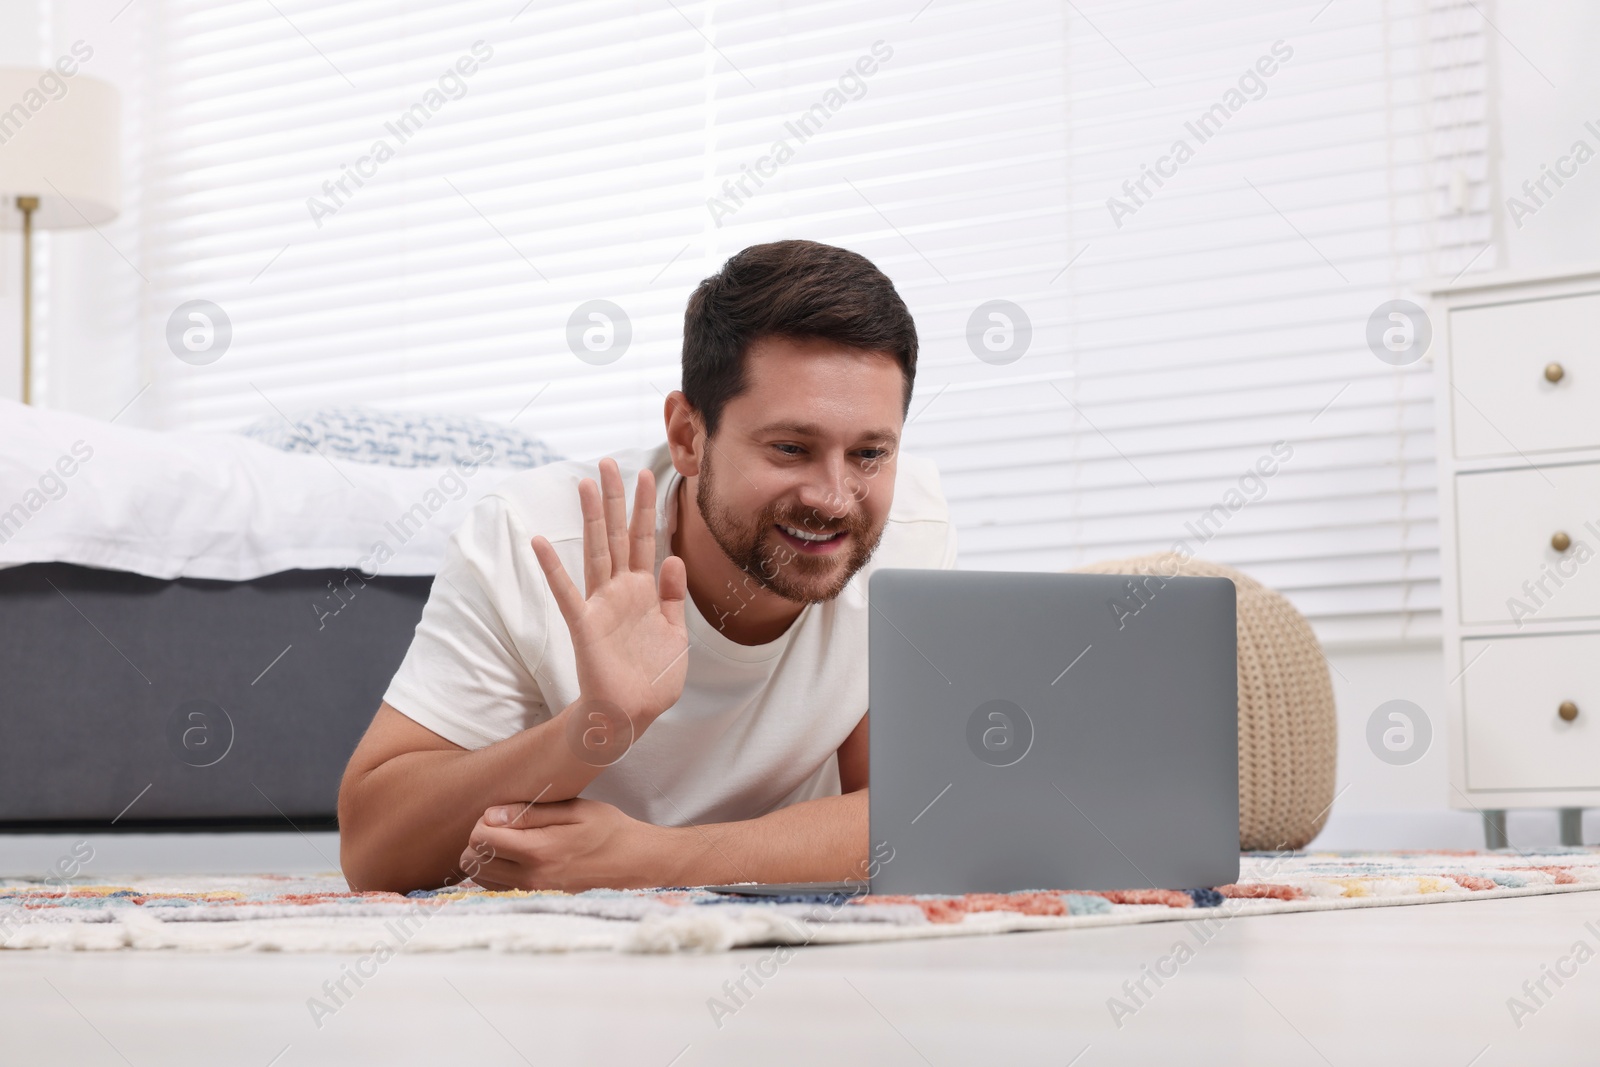 Photo of Happy man greeting someone during video chat via laptop